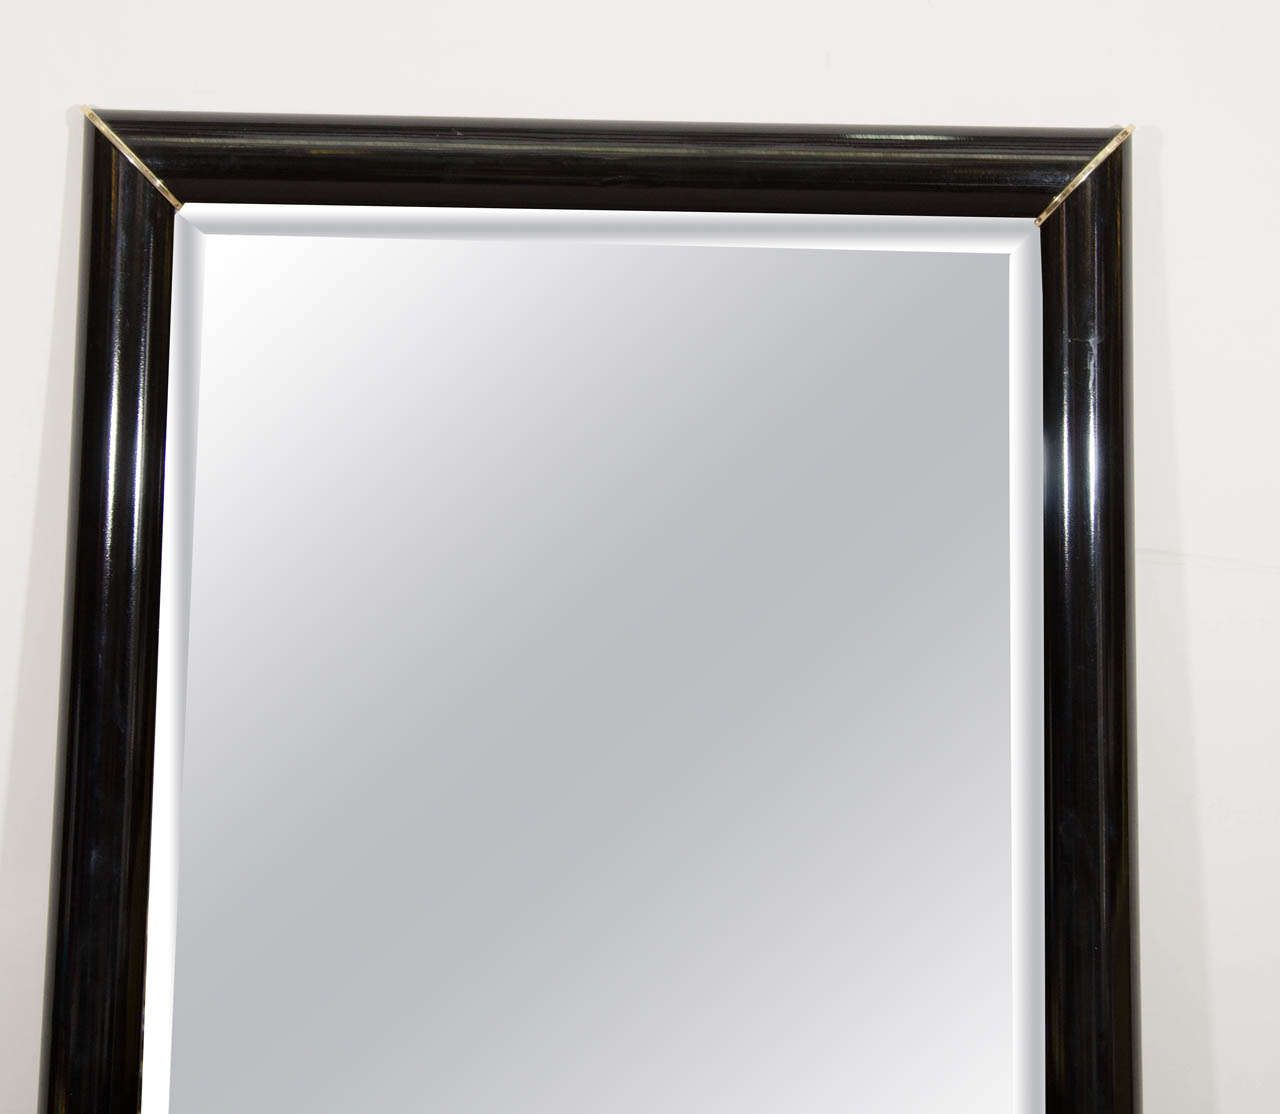 Black Lacquered Wall Mirror With Gold Corner Accents At 1stdibs With Cut Corner Wall Mirrors (View 2 of 15)